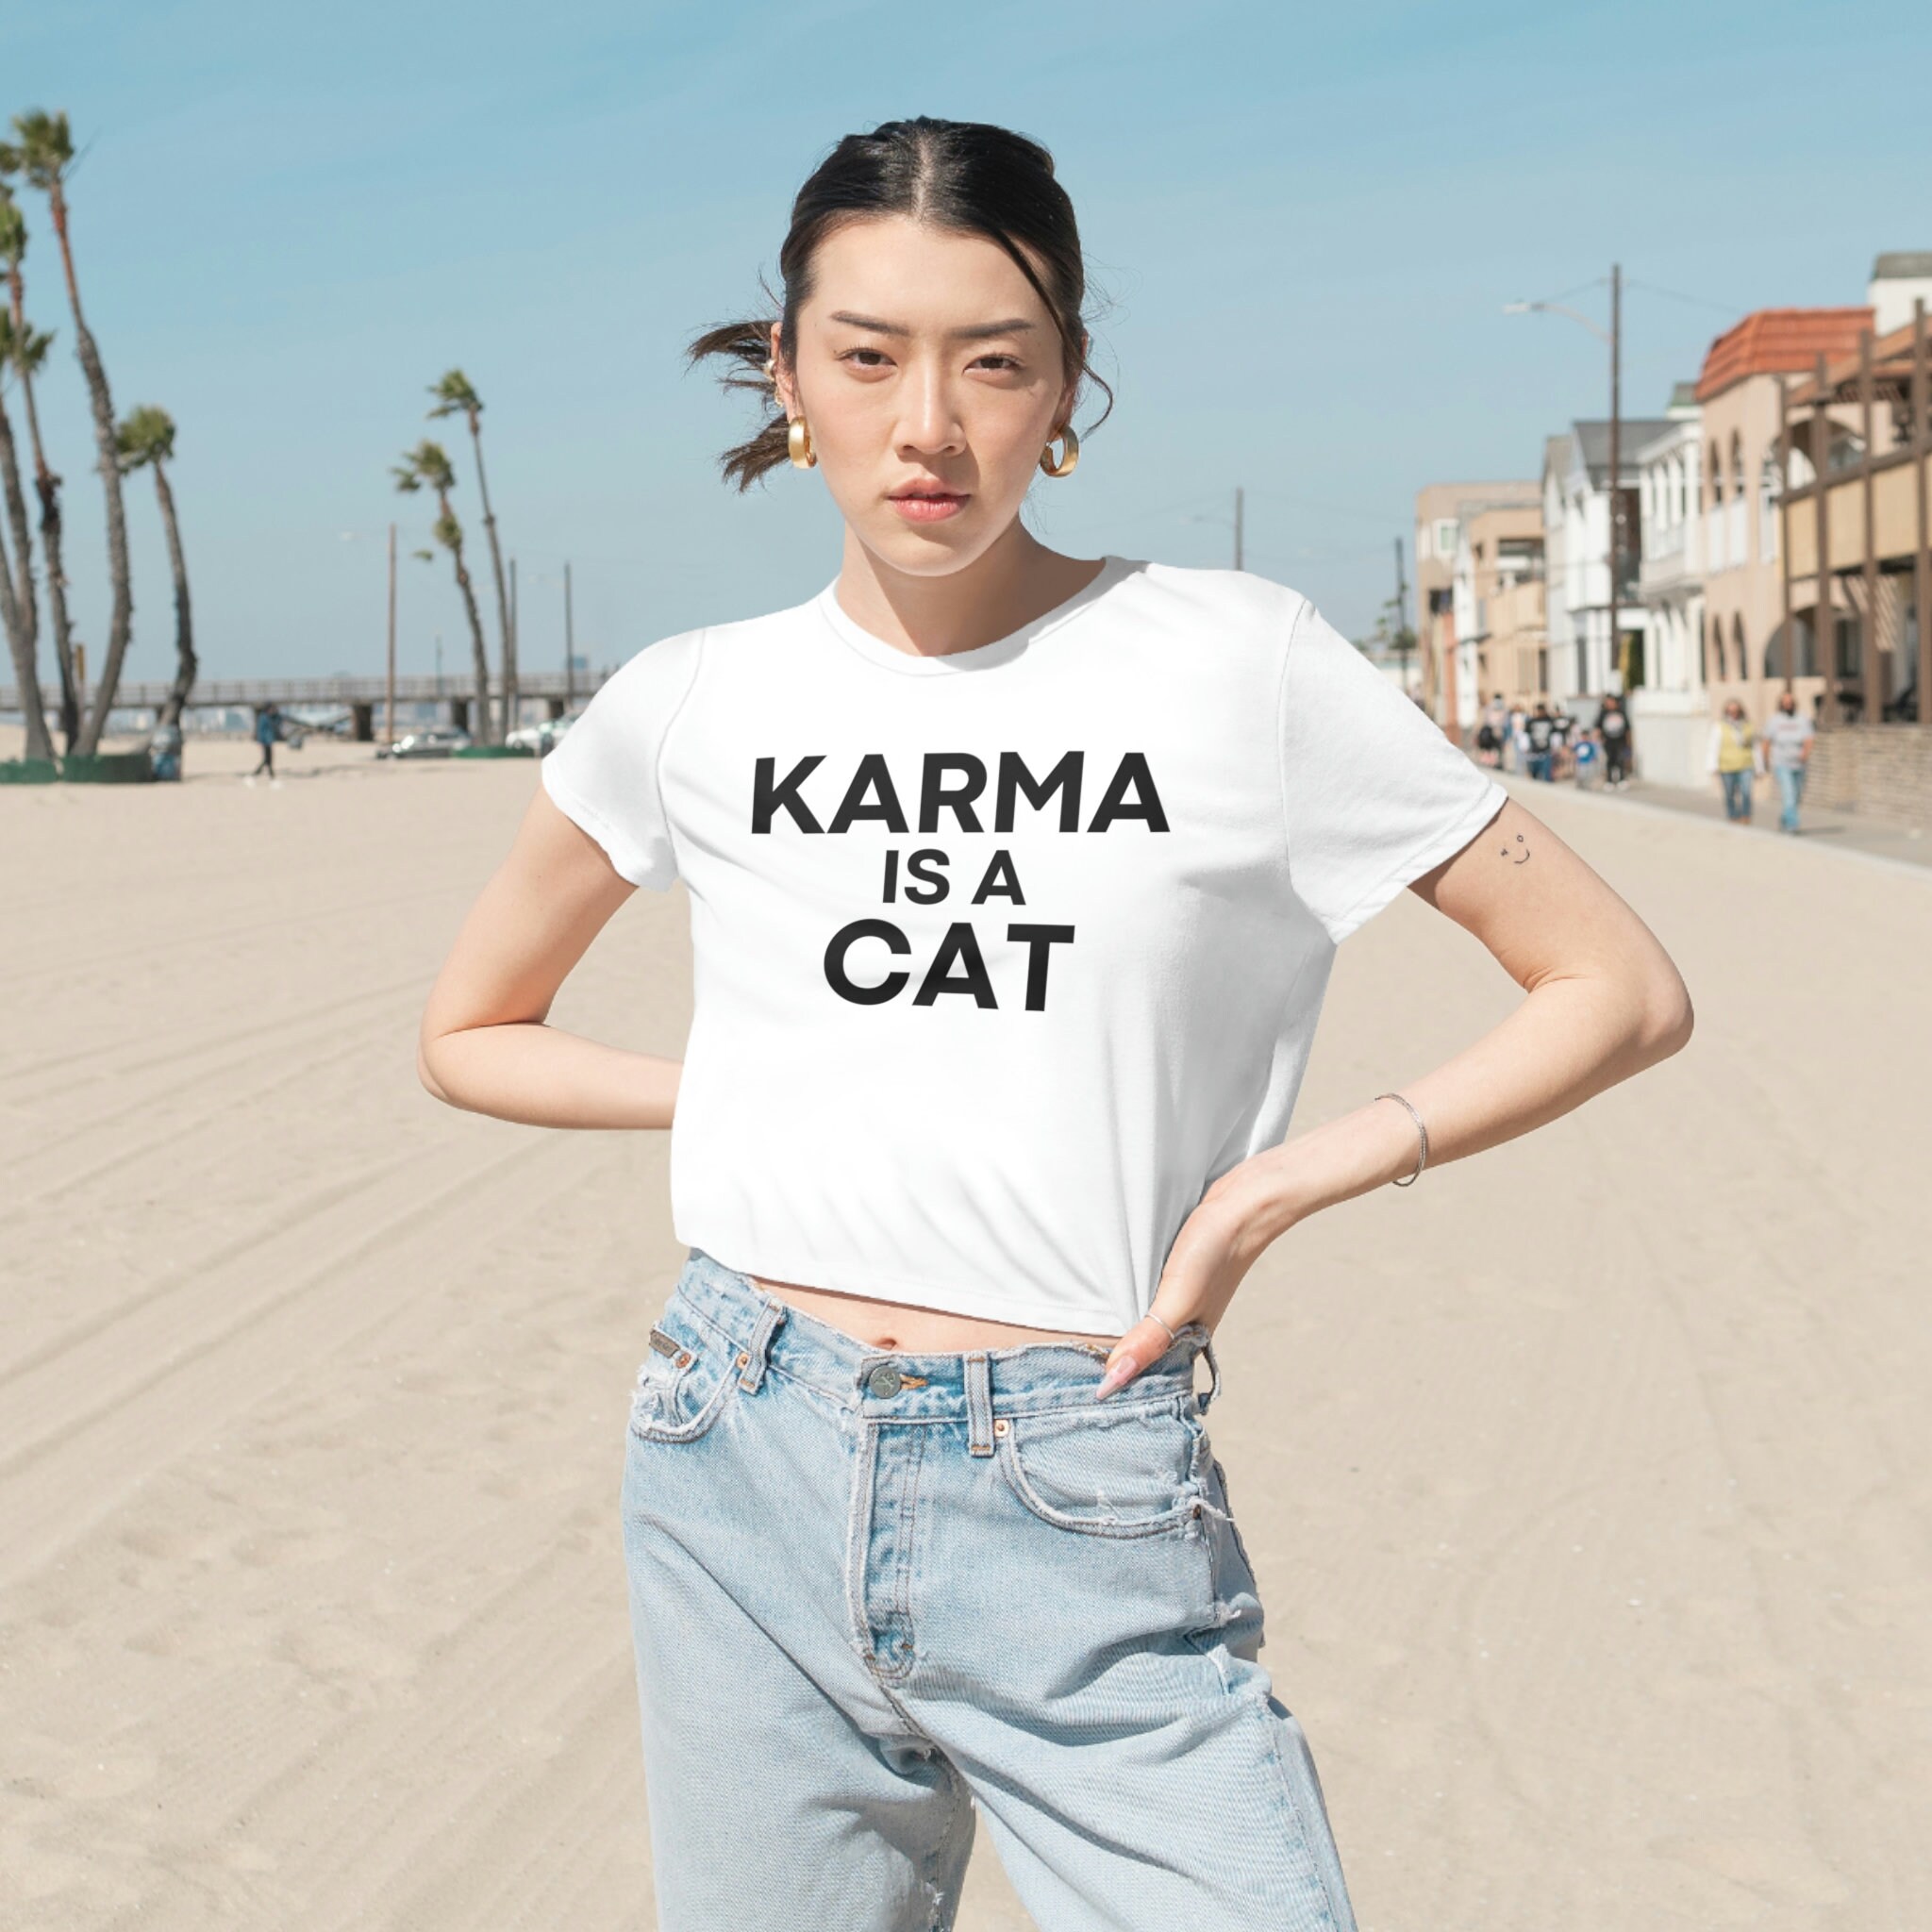 Karma is a Cat Taylor Crop Top Shirt, Taylor Flowy Cropped Tee